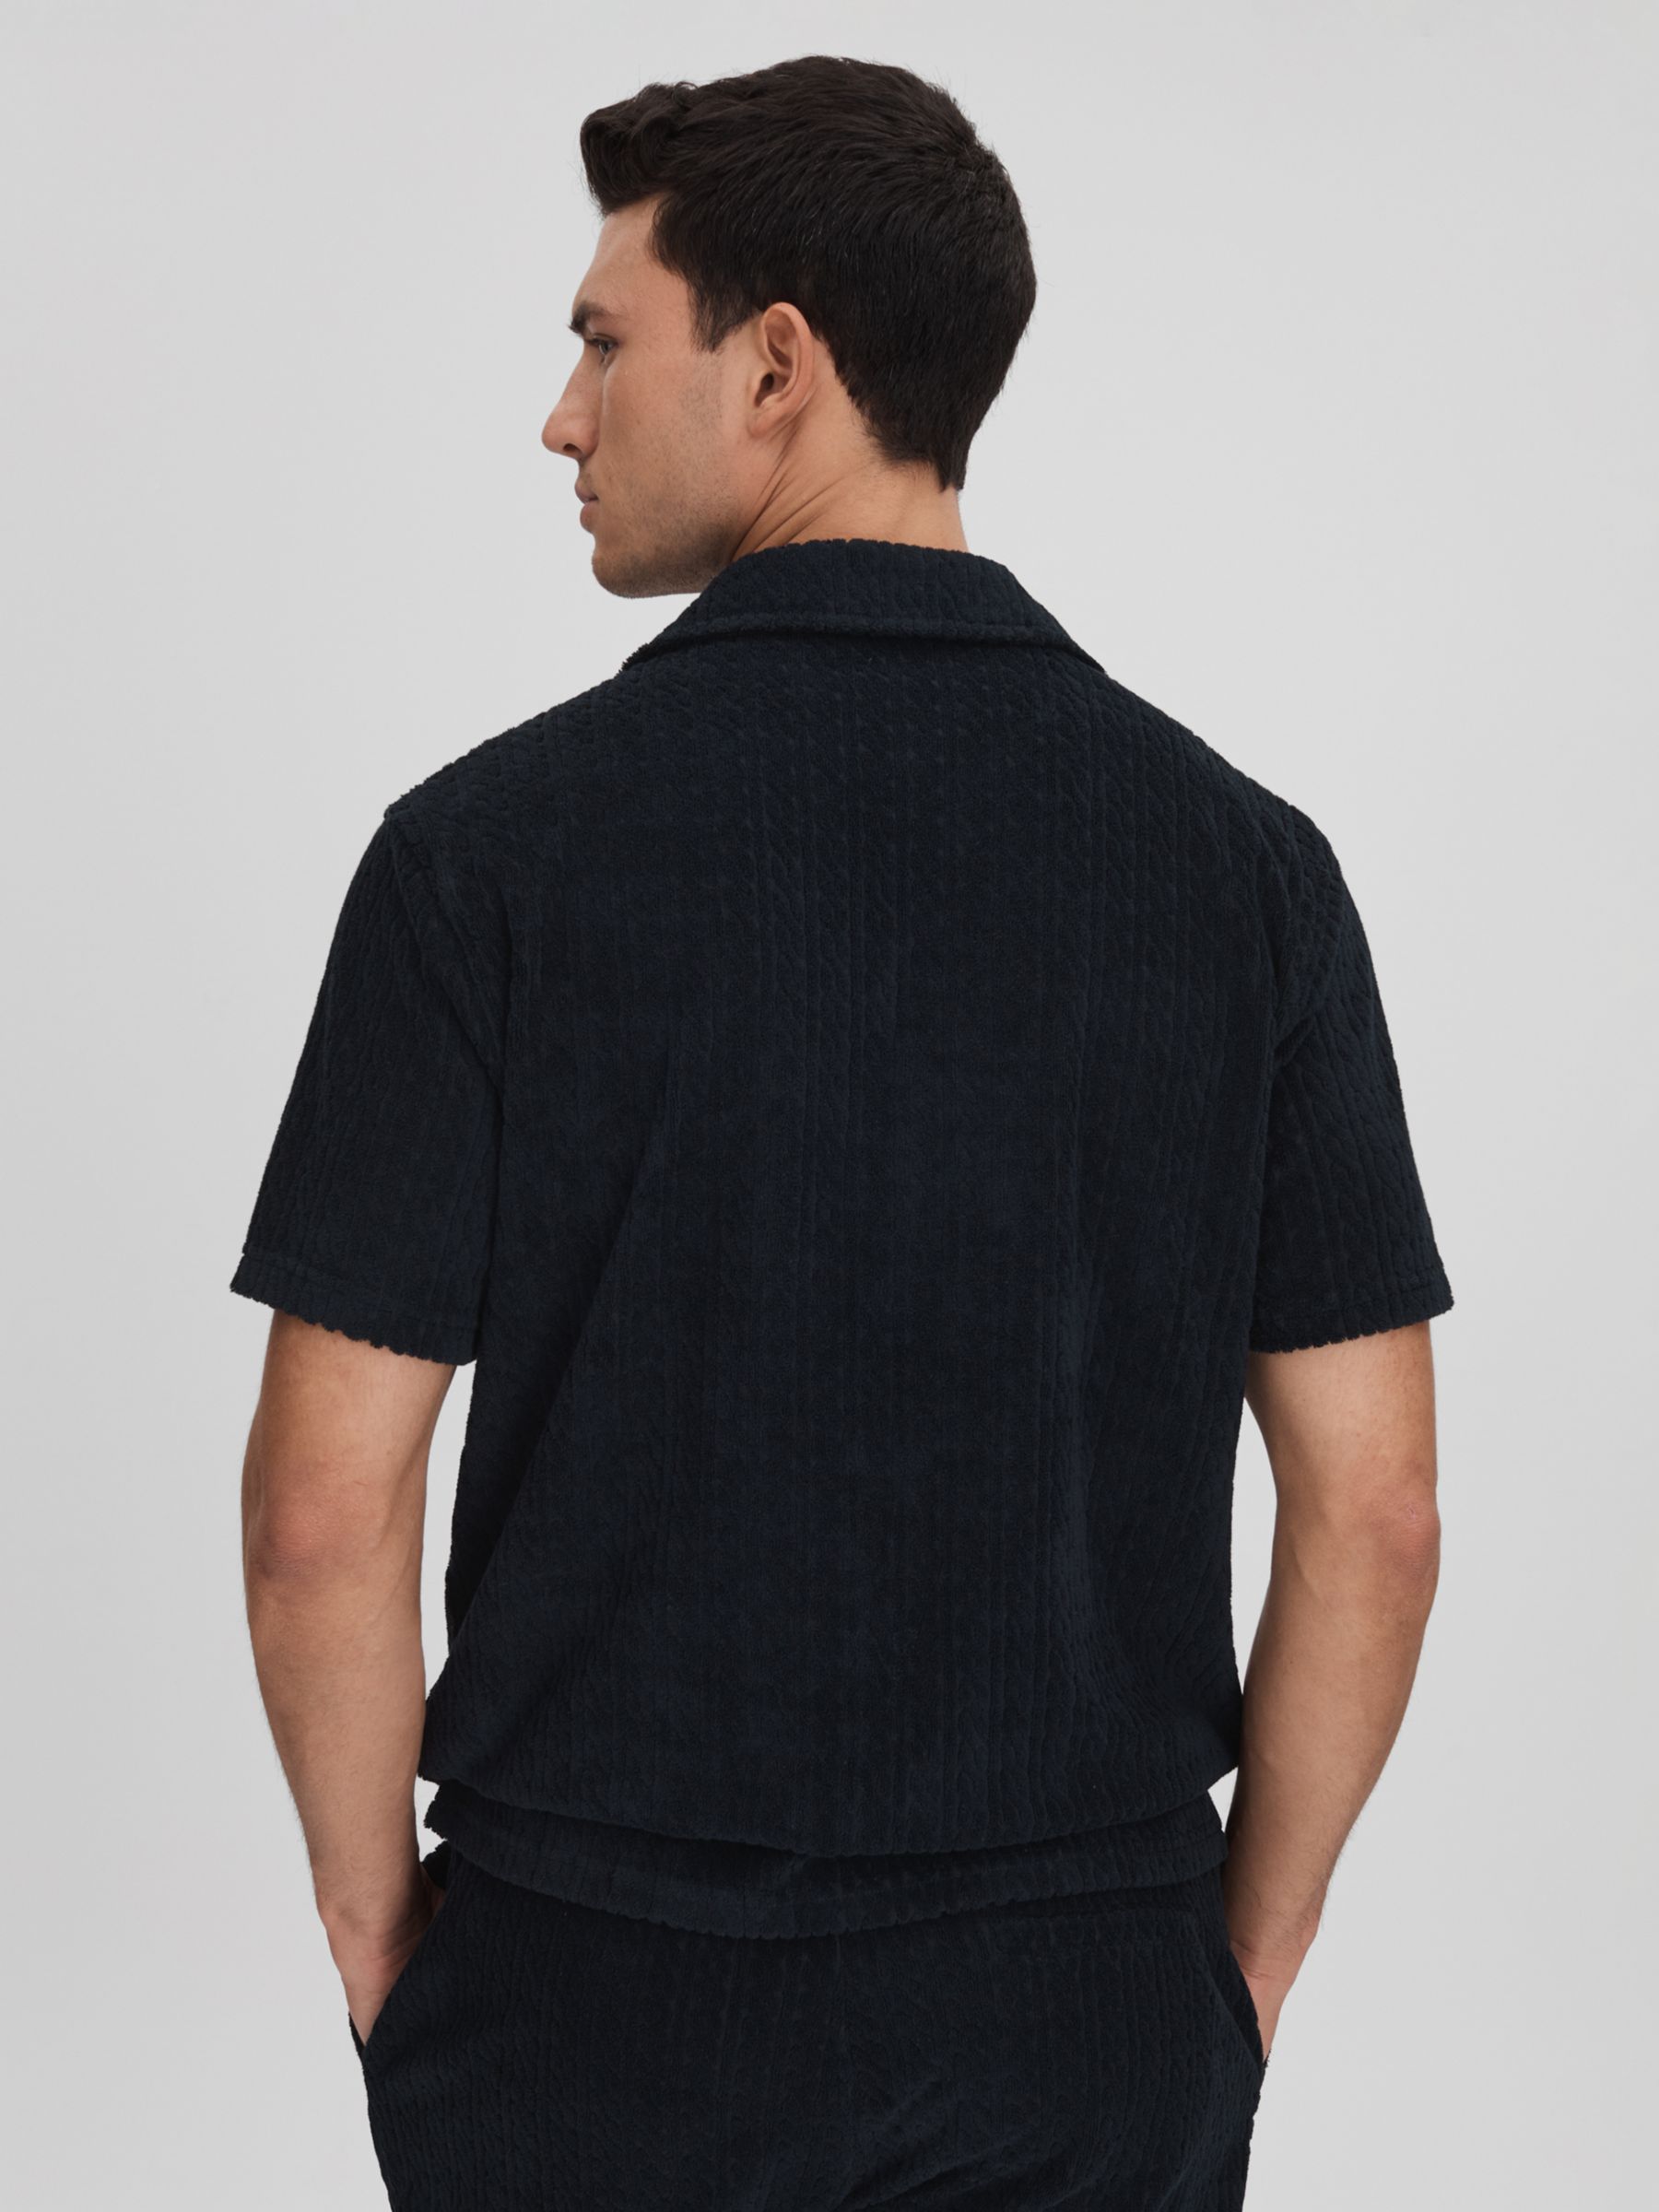 Buy Reiss Bay Cuban Cable Towelling Shirt, Navy Online at johnlewis.com